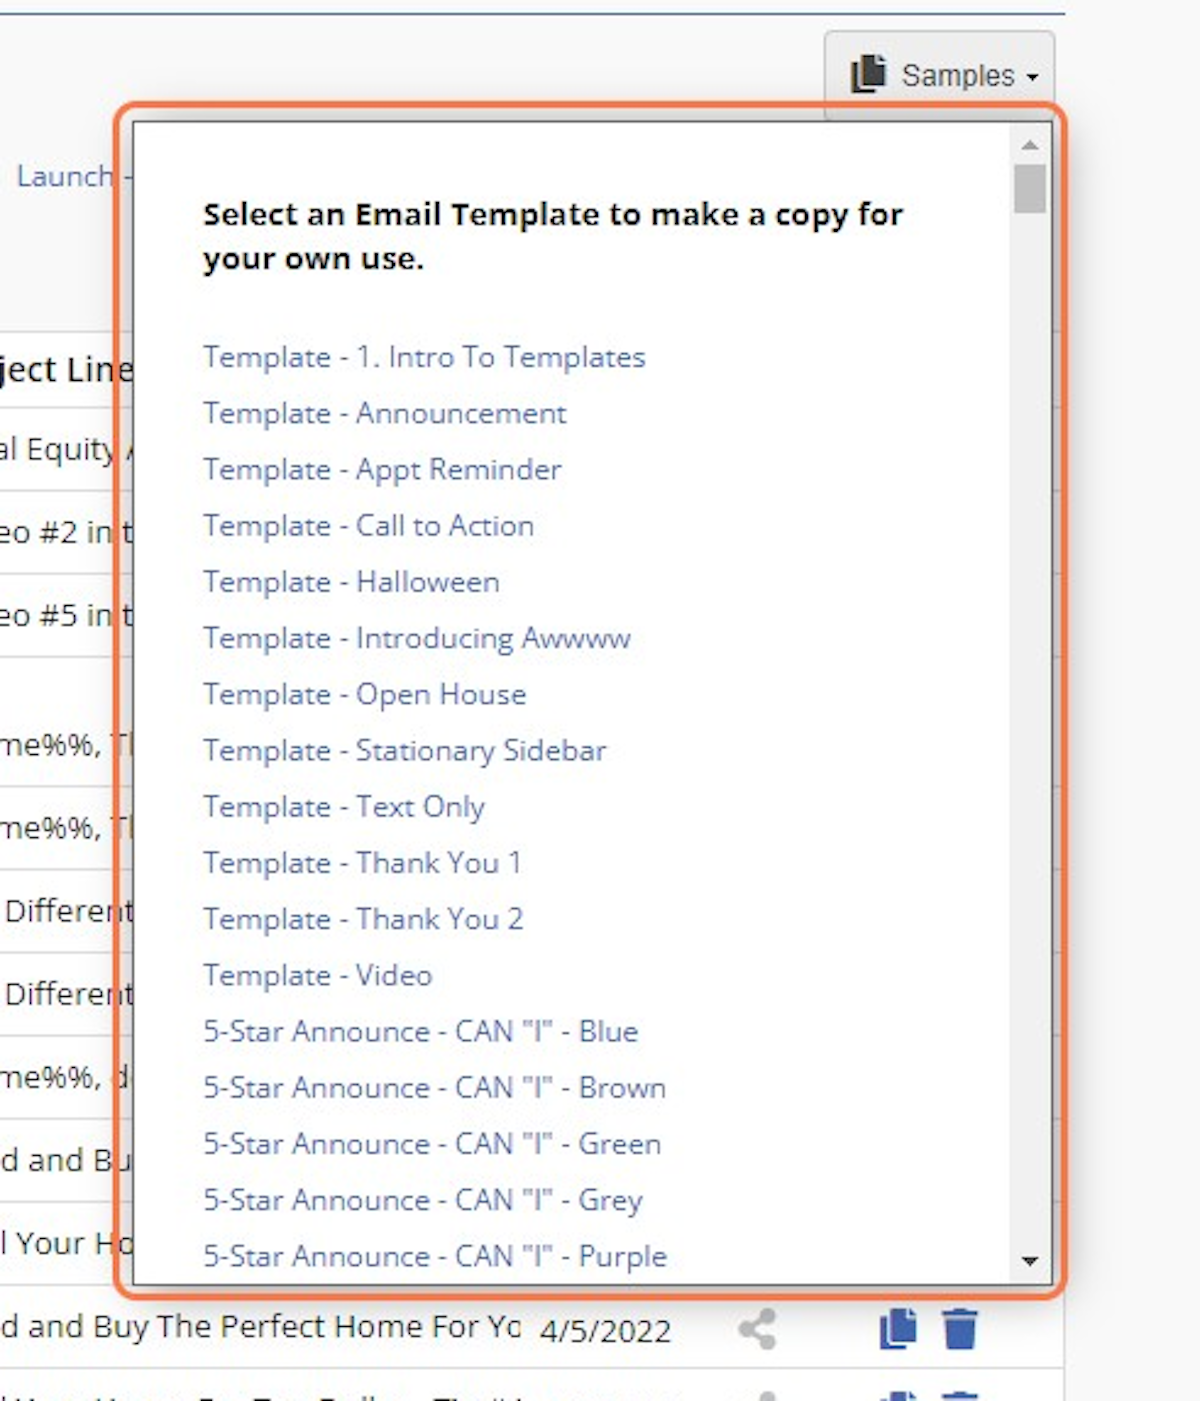 In Samples, the templates are listed in alphabetical order. Simply click on the template name to download.